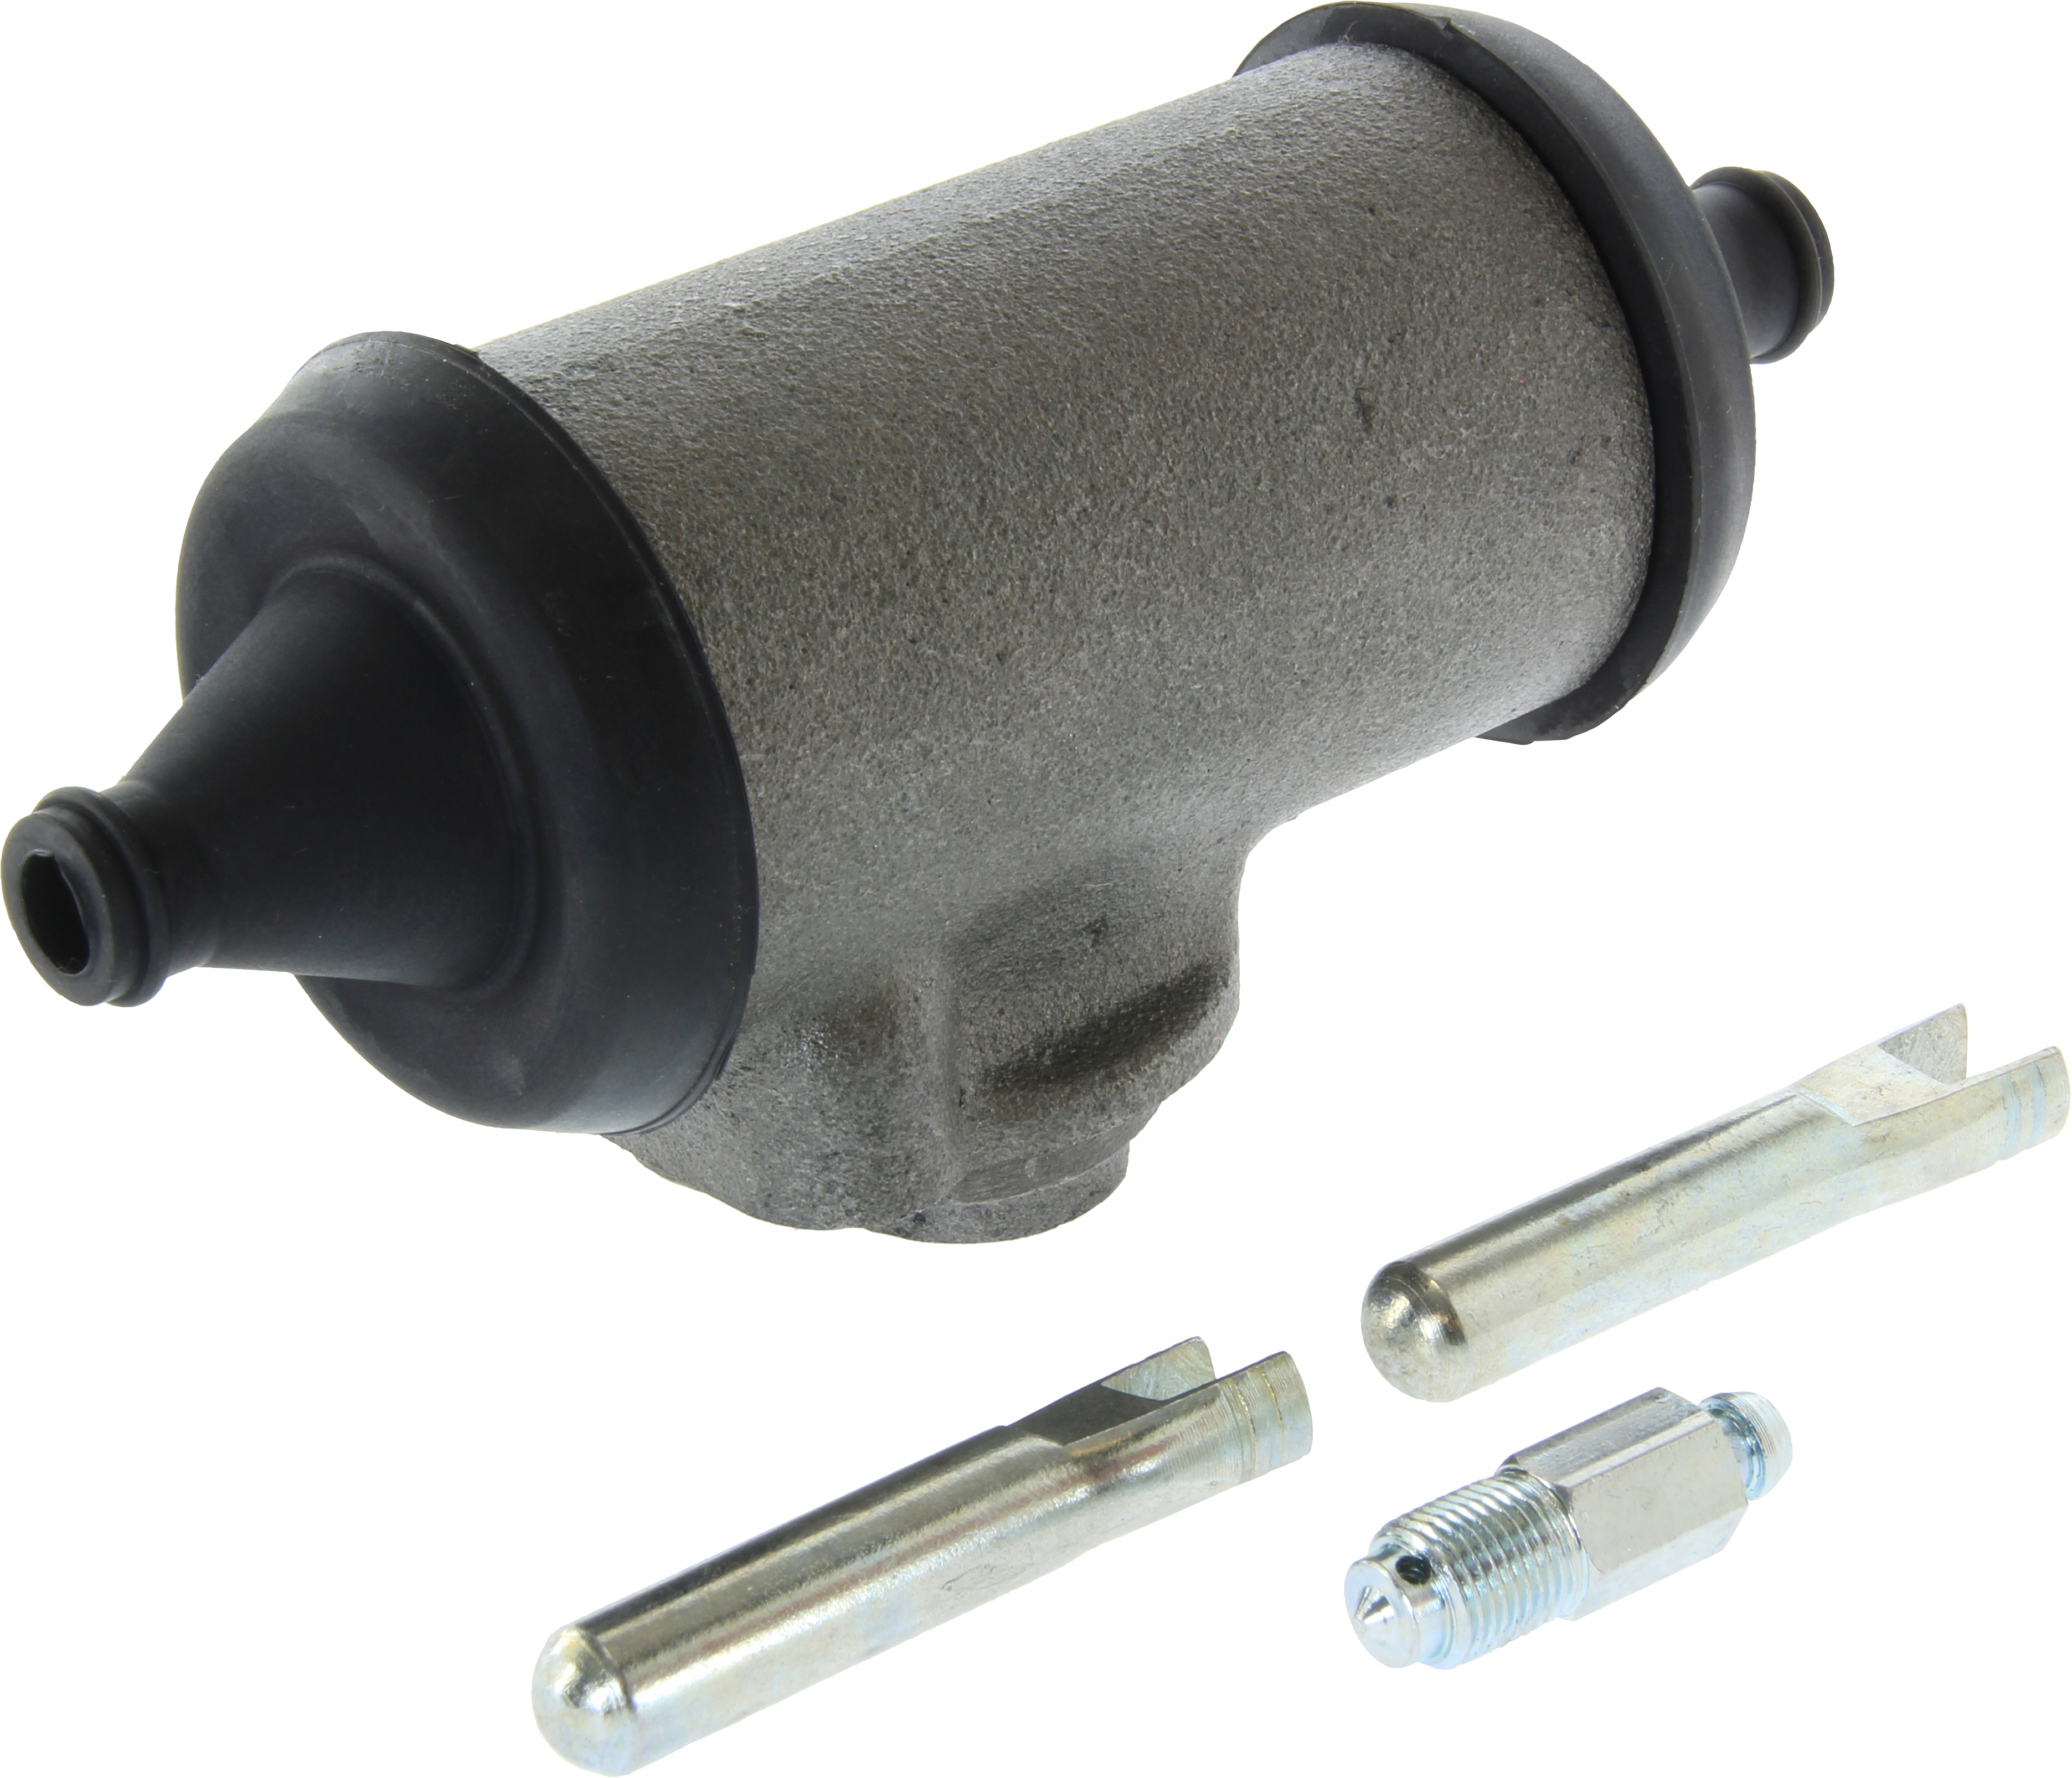 Premium Rear Left & Right Wheel Cylinders for 1970-1976 Dodge Dart See Notes